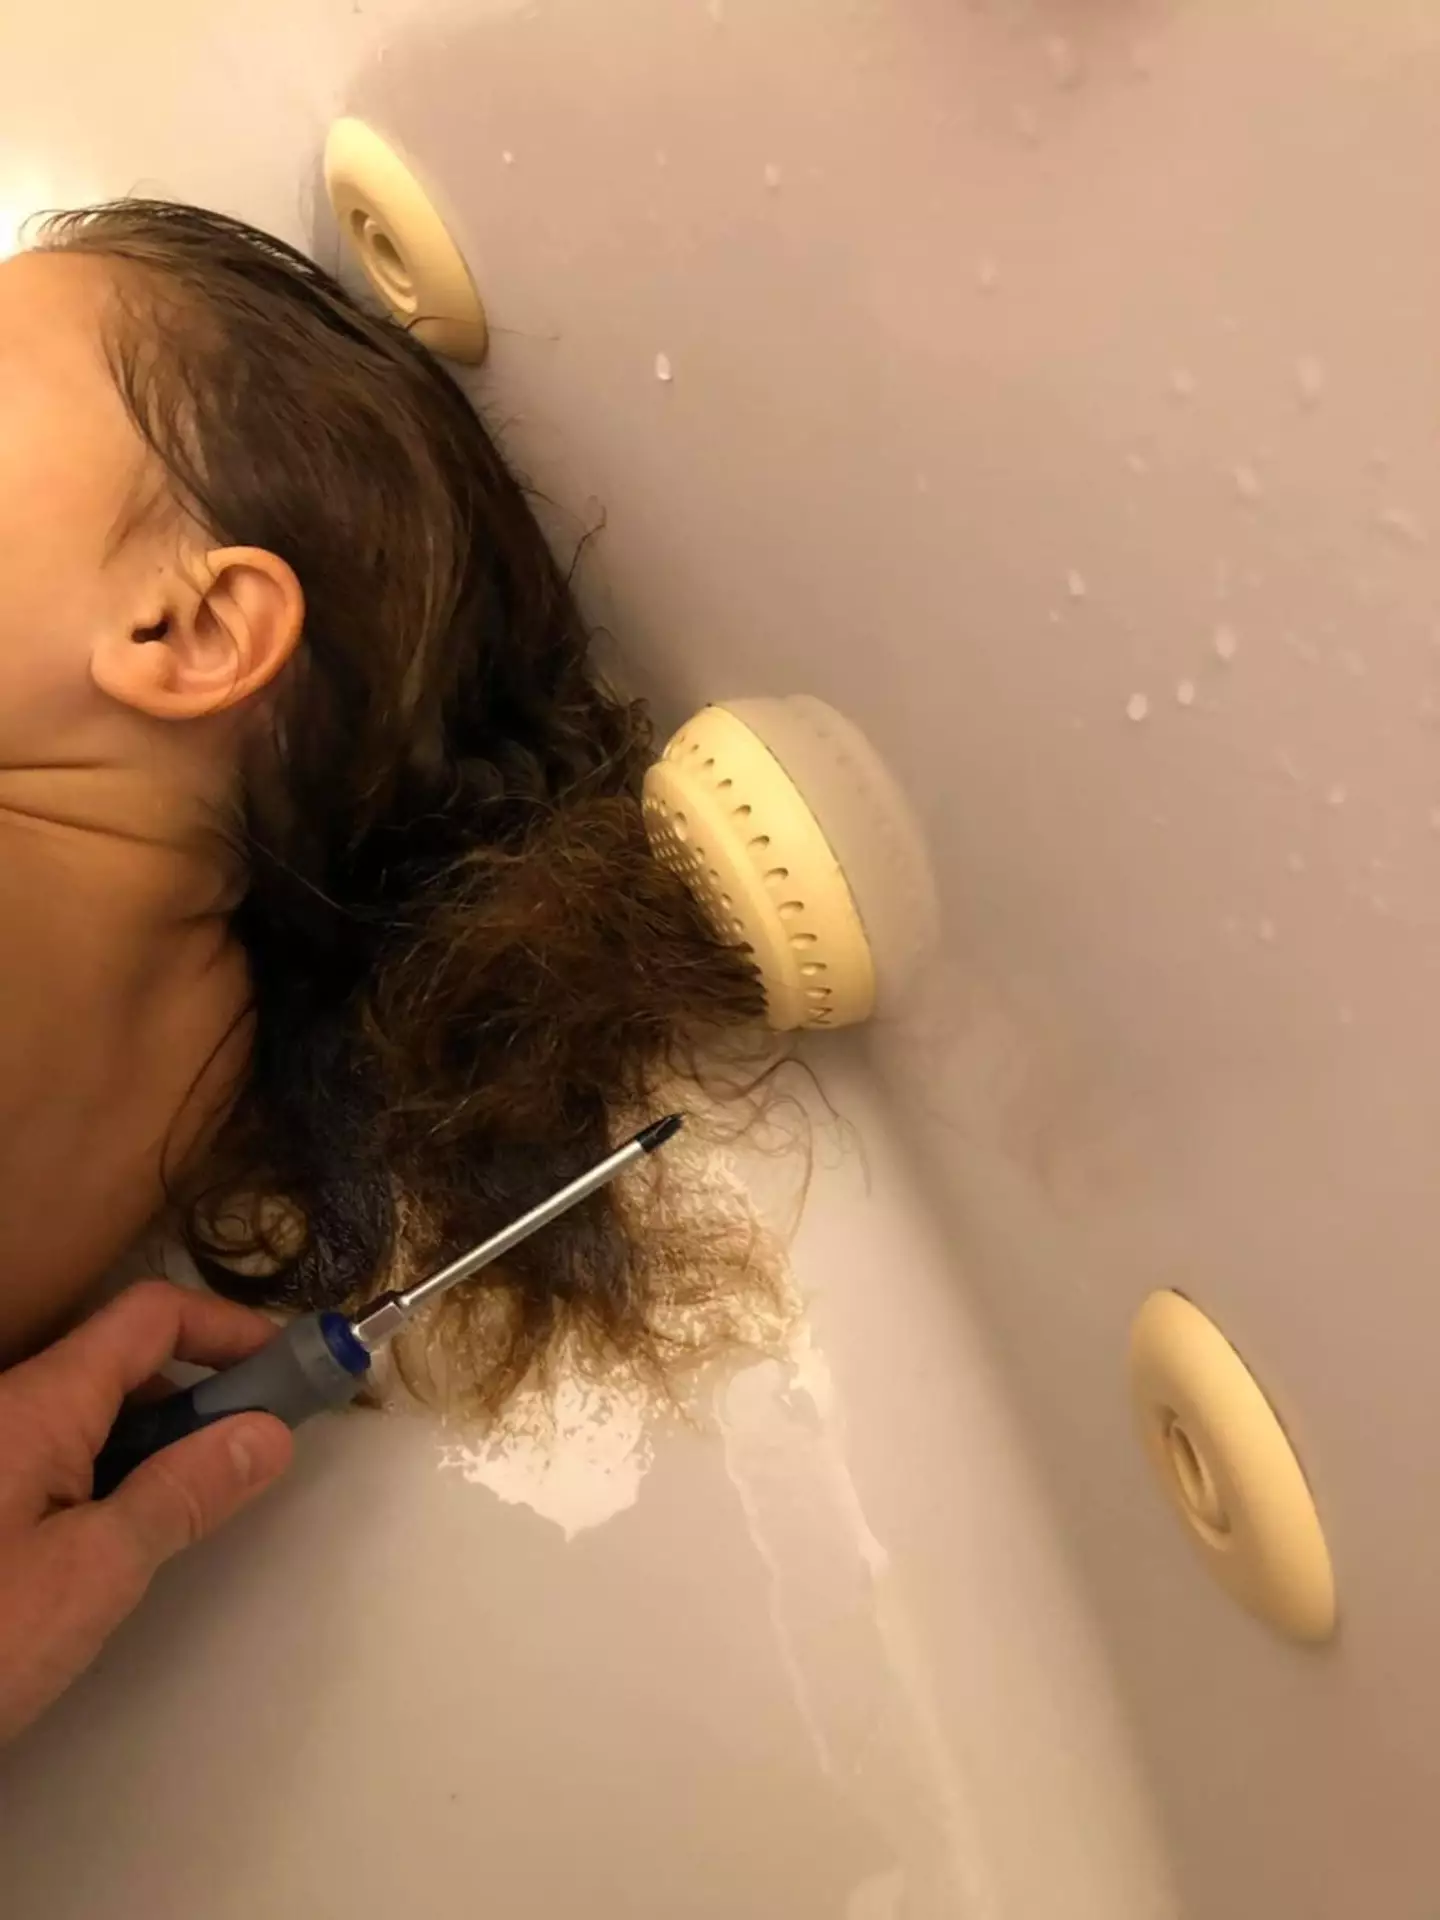 Elizabeth's hair had gotten trapped in a suction valve.